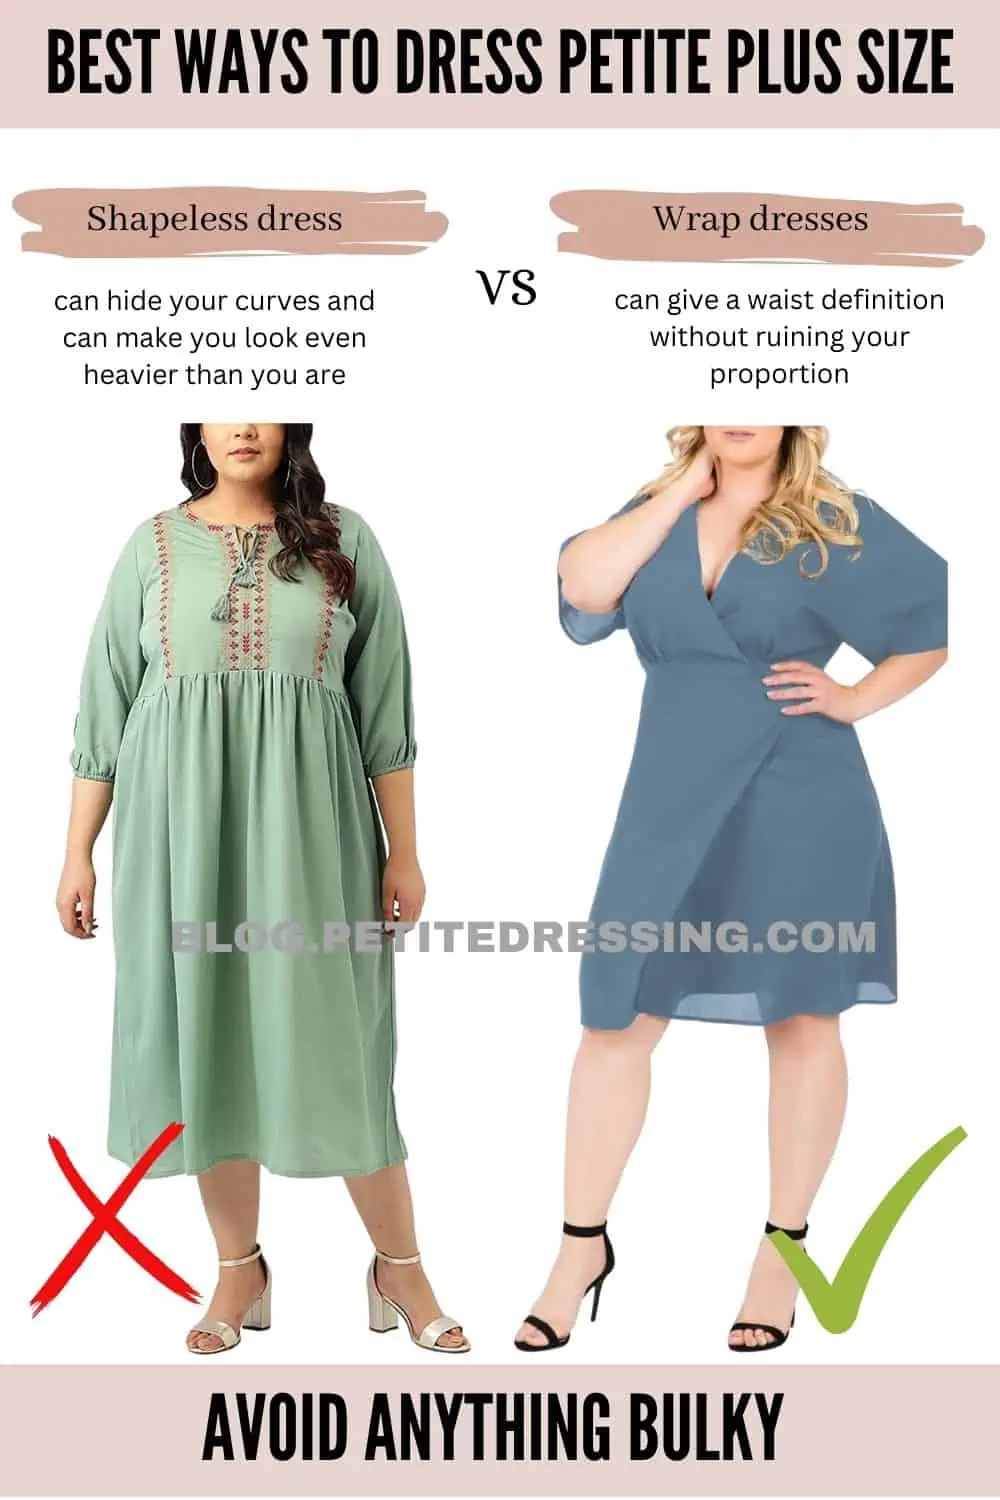 Short, Fat, and Stylish: A Fashion Guide for Plus-Size Petite